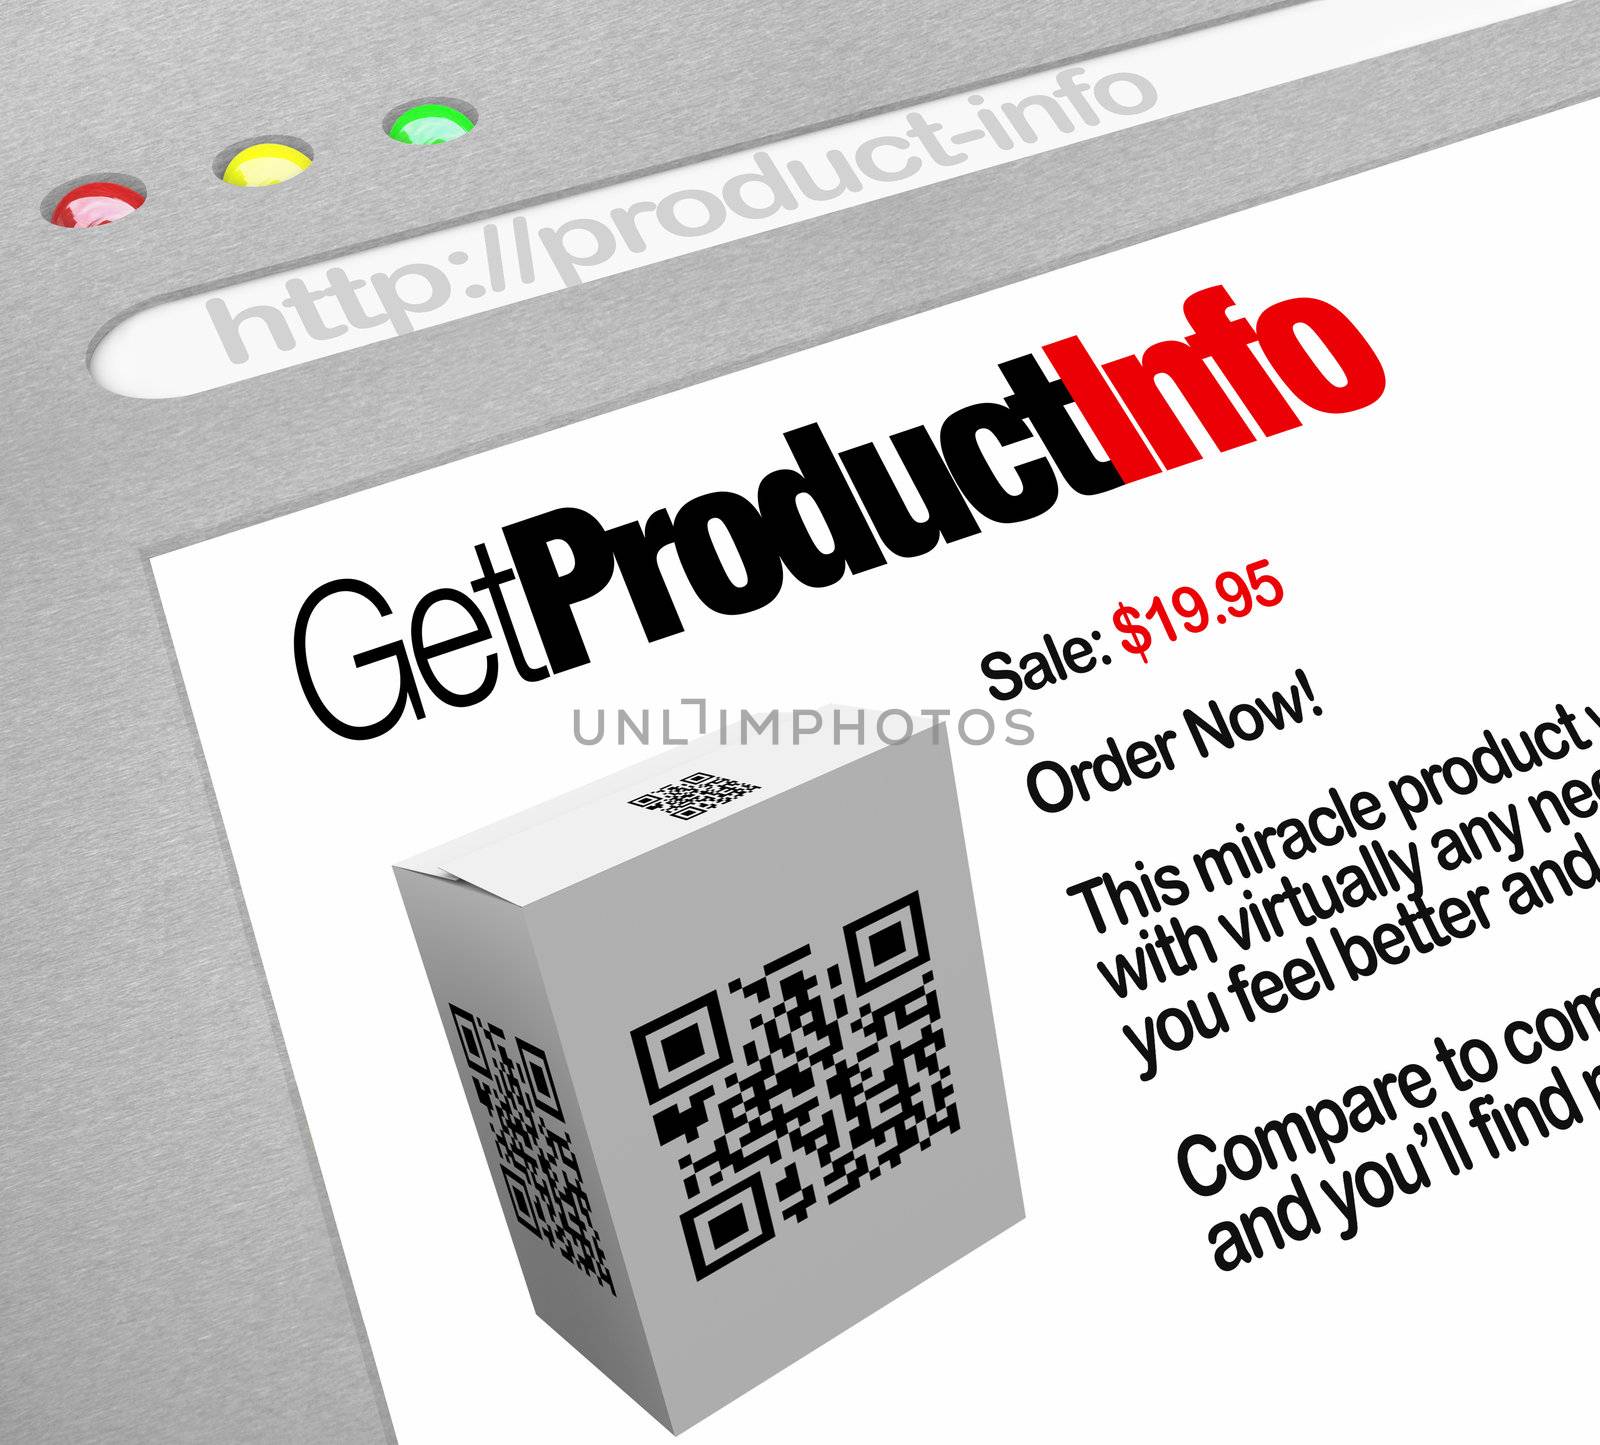 A web browser window shows the Get Product Info, a QR barcode on a box that has been scanned by a smart phone or other mobile device by a customer